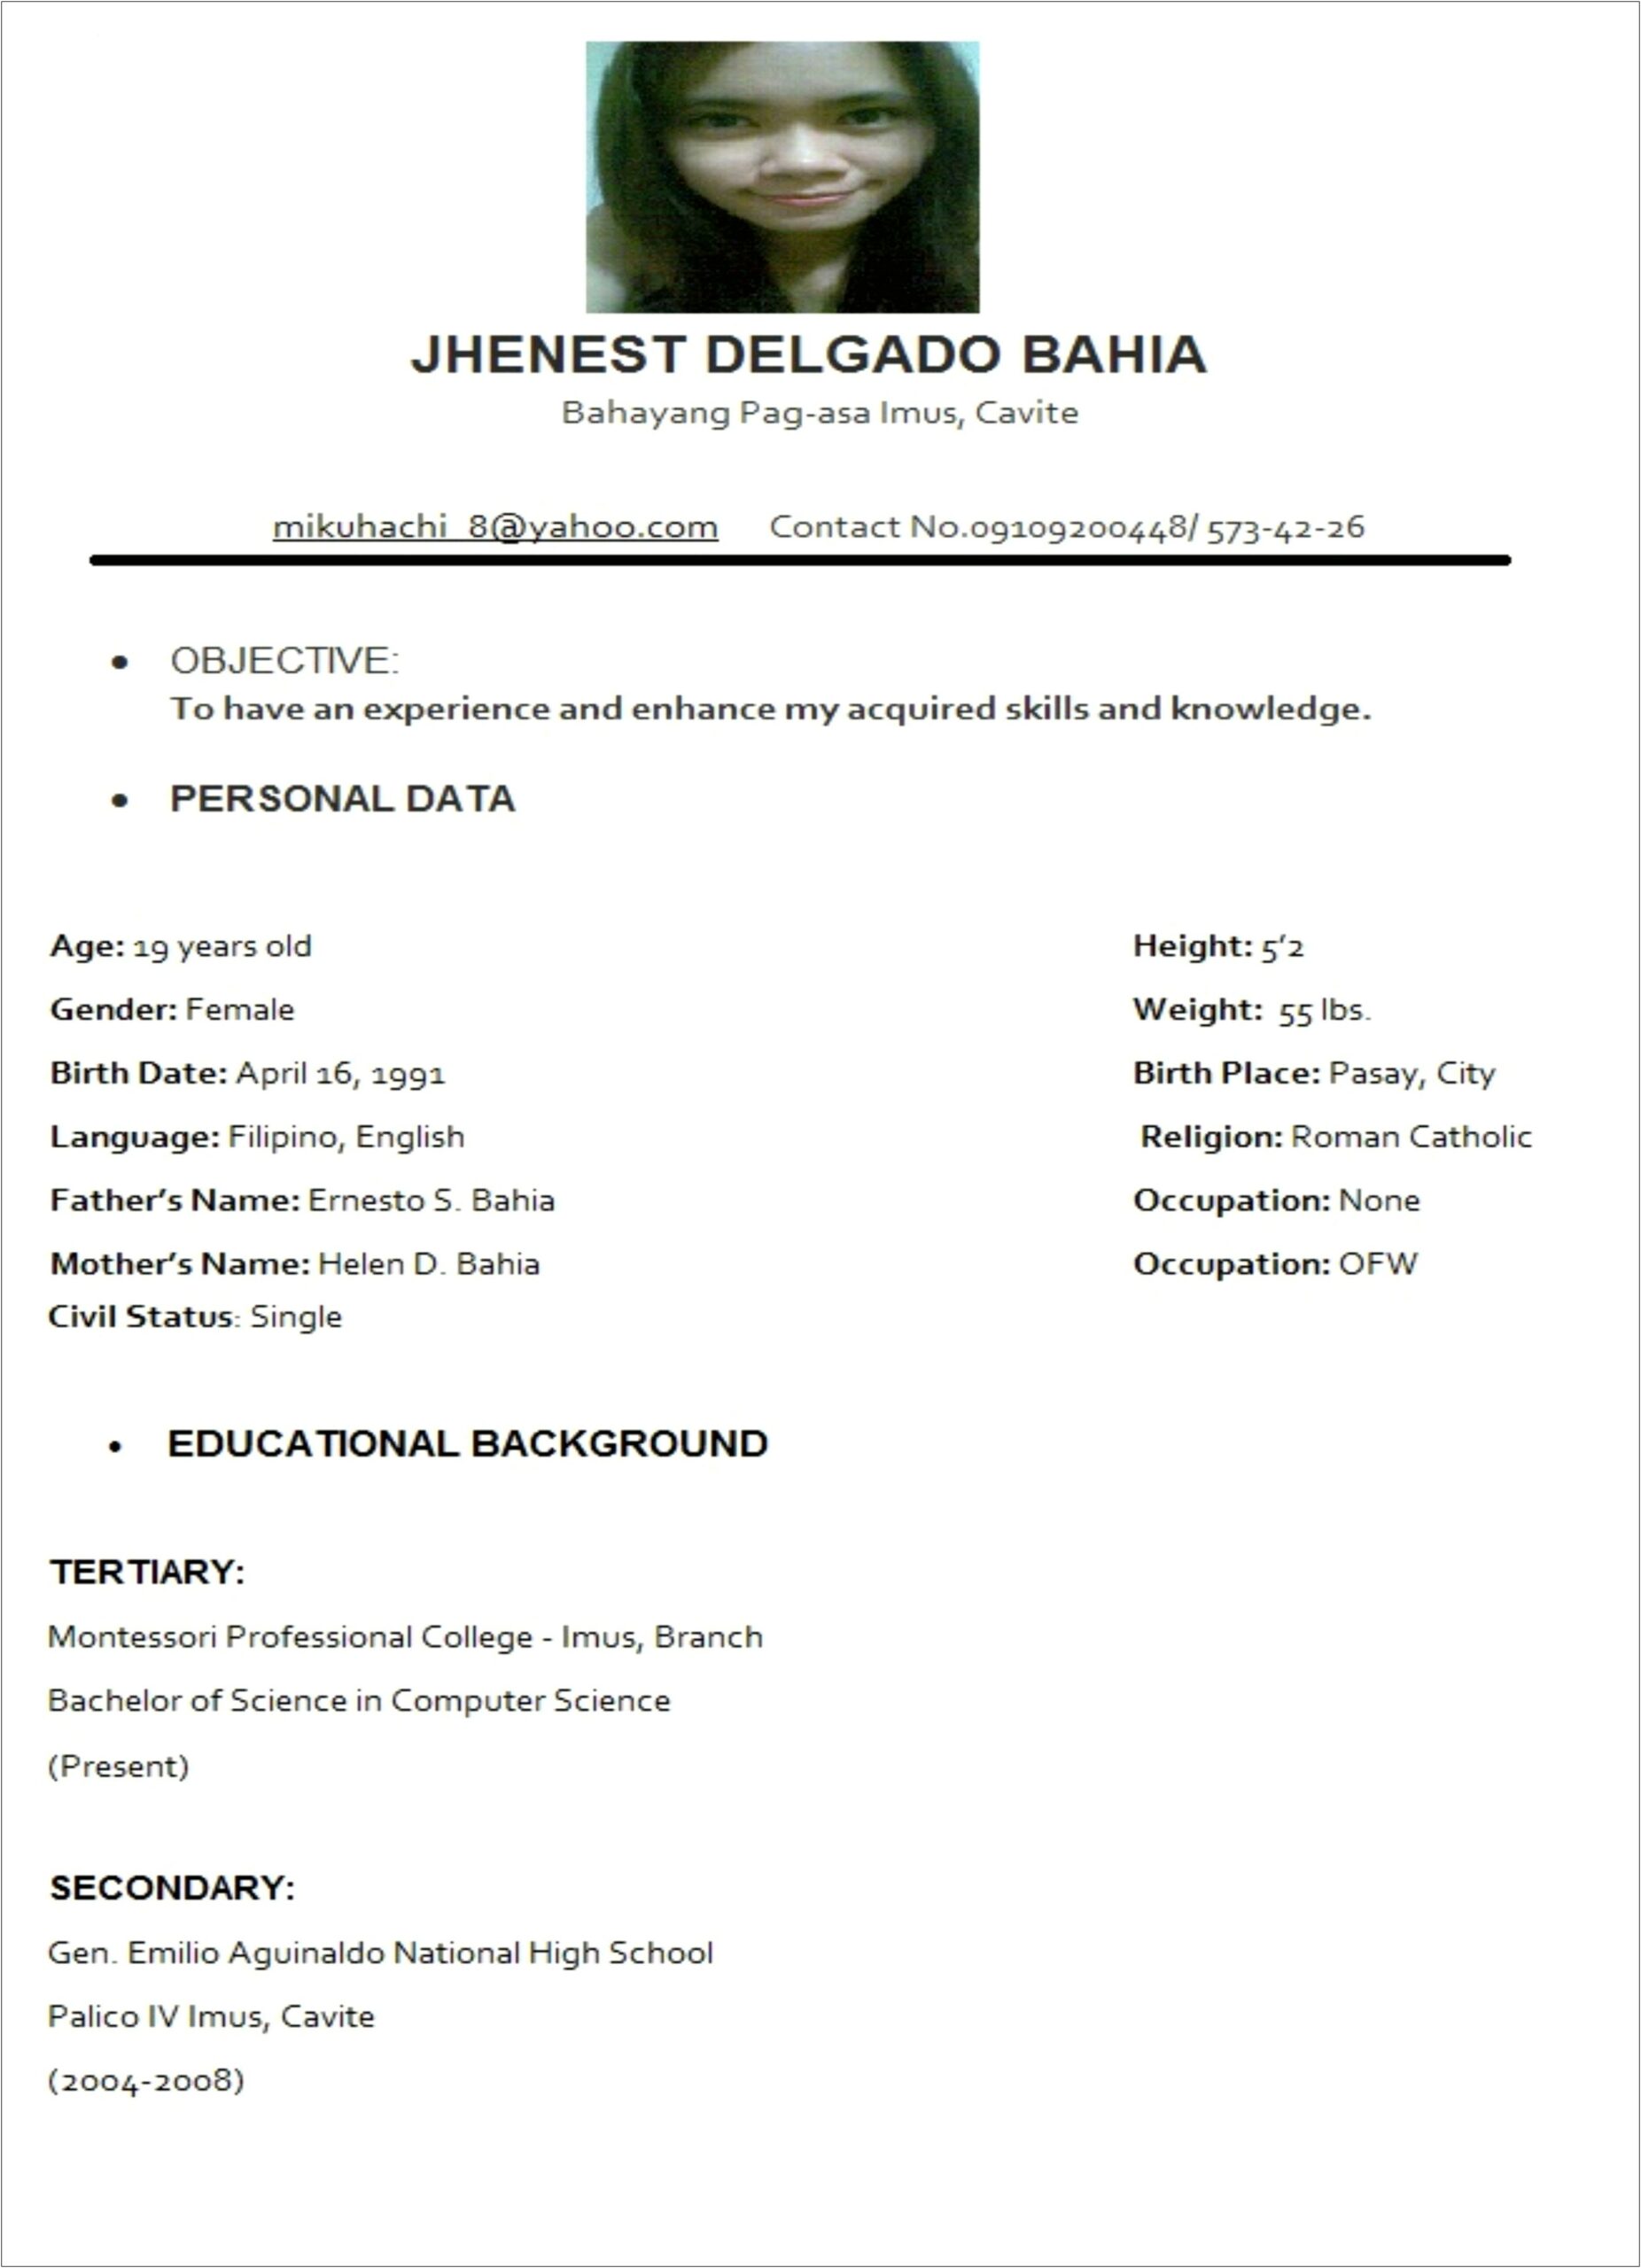 Examples Of Objective In Resume For Ojt